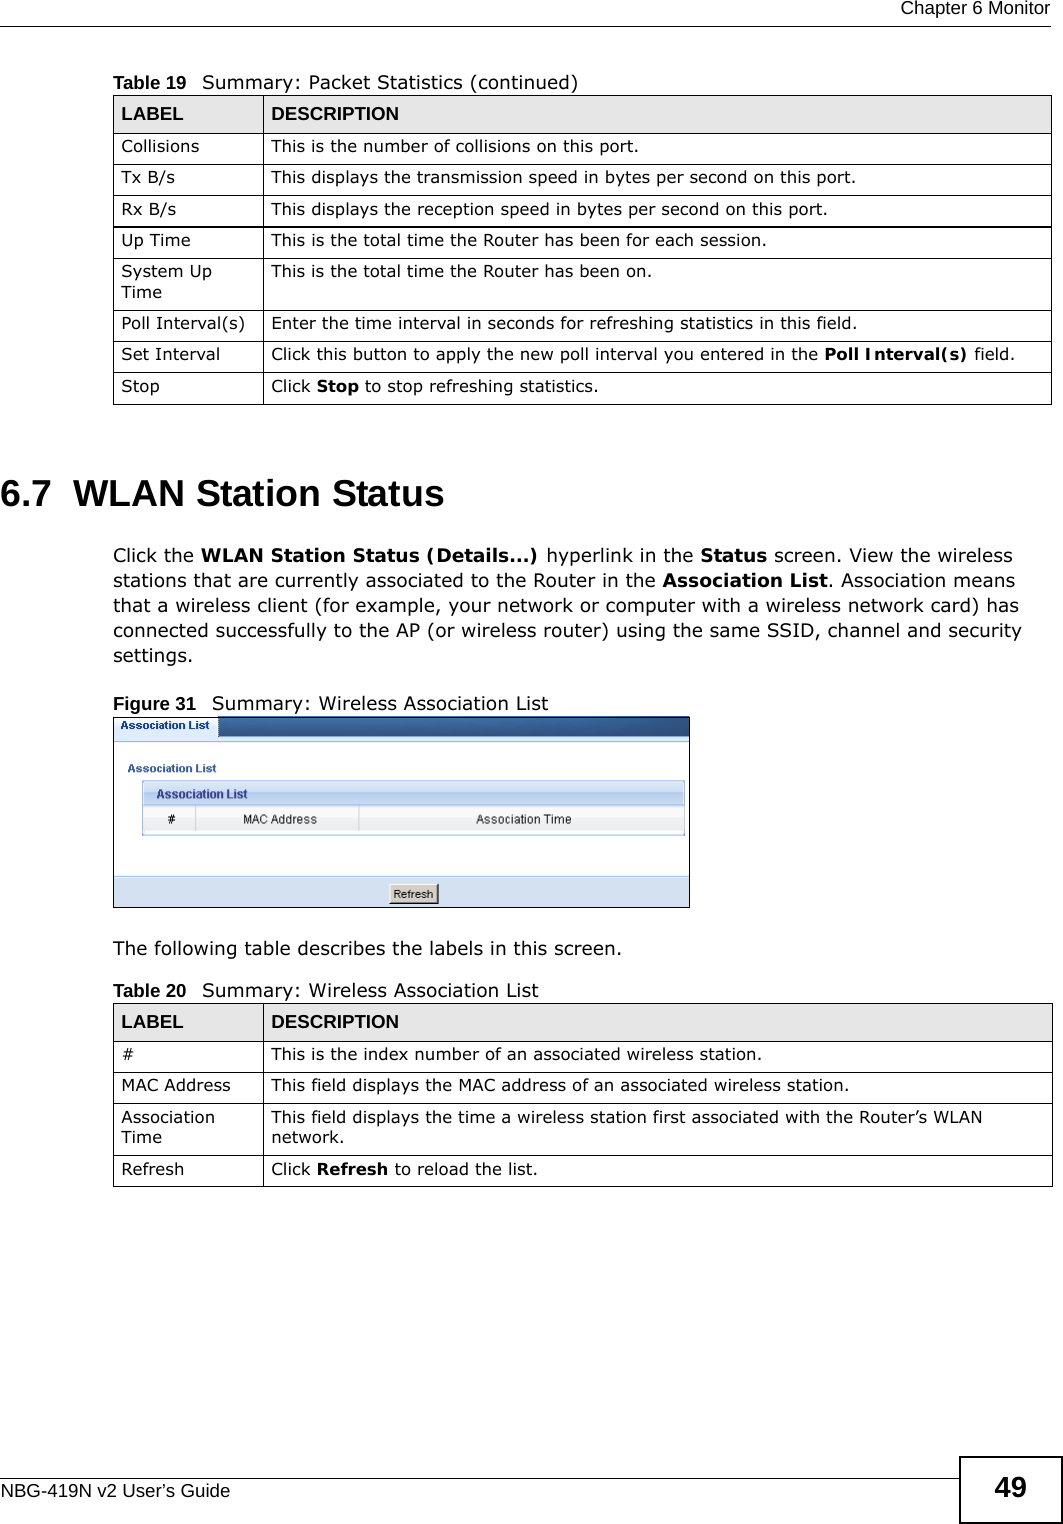  Chapter 6 MonitorNBG-419N v2 User’s Guide 496.7  WLAN Station Status     Click the WLAN Station Status (Details...) hyperlink in the Status screen. View the wireless stations that are currently associated to the Router in the Association List. Association means that a wireless client (for example, your network or computer with a wireless network card) has connected successfully to the AP (or wireless router) using the same SSID, channel and security settings.Figure 31   Summary: Wireless Association ListThe following table describes the labels in this screen.Collisions  This is the number of collisions on this port.Tx B/s  This displays the transmission speed in bytes per second on this port.Rx B/s This displays the reception speed in bytes per second on this port.Up Time This is the total time the Router has been for each session.System Up TimeThis is the total time the Router has been on.Poll Interval(s) Enter the time interval in seconds for refreshing statistics in this field.Set Interval Click this button to apply the new poll interval you entered in the Poll Interval(s) field.Stop Click Stop to stop refreshing statistics.Table 19   Summary: Packet Statistics (continued)LABEL DESCRIPTIONTable 20   Summary: Wireless Association ListLABEL DESCRIPTION#  This is the index number of an associated wireless station. MAC Address  This field displays the MAC address of an associated wireless station.Association TimeThis field displays the time a wireless station first associated with the Router’s WLAN network.Refresh Click Refresh to reload the list. 